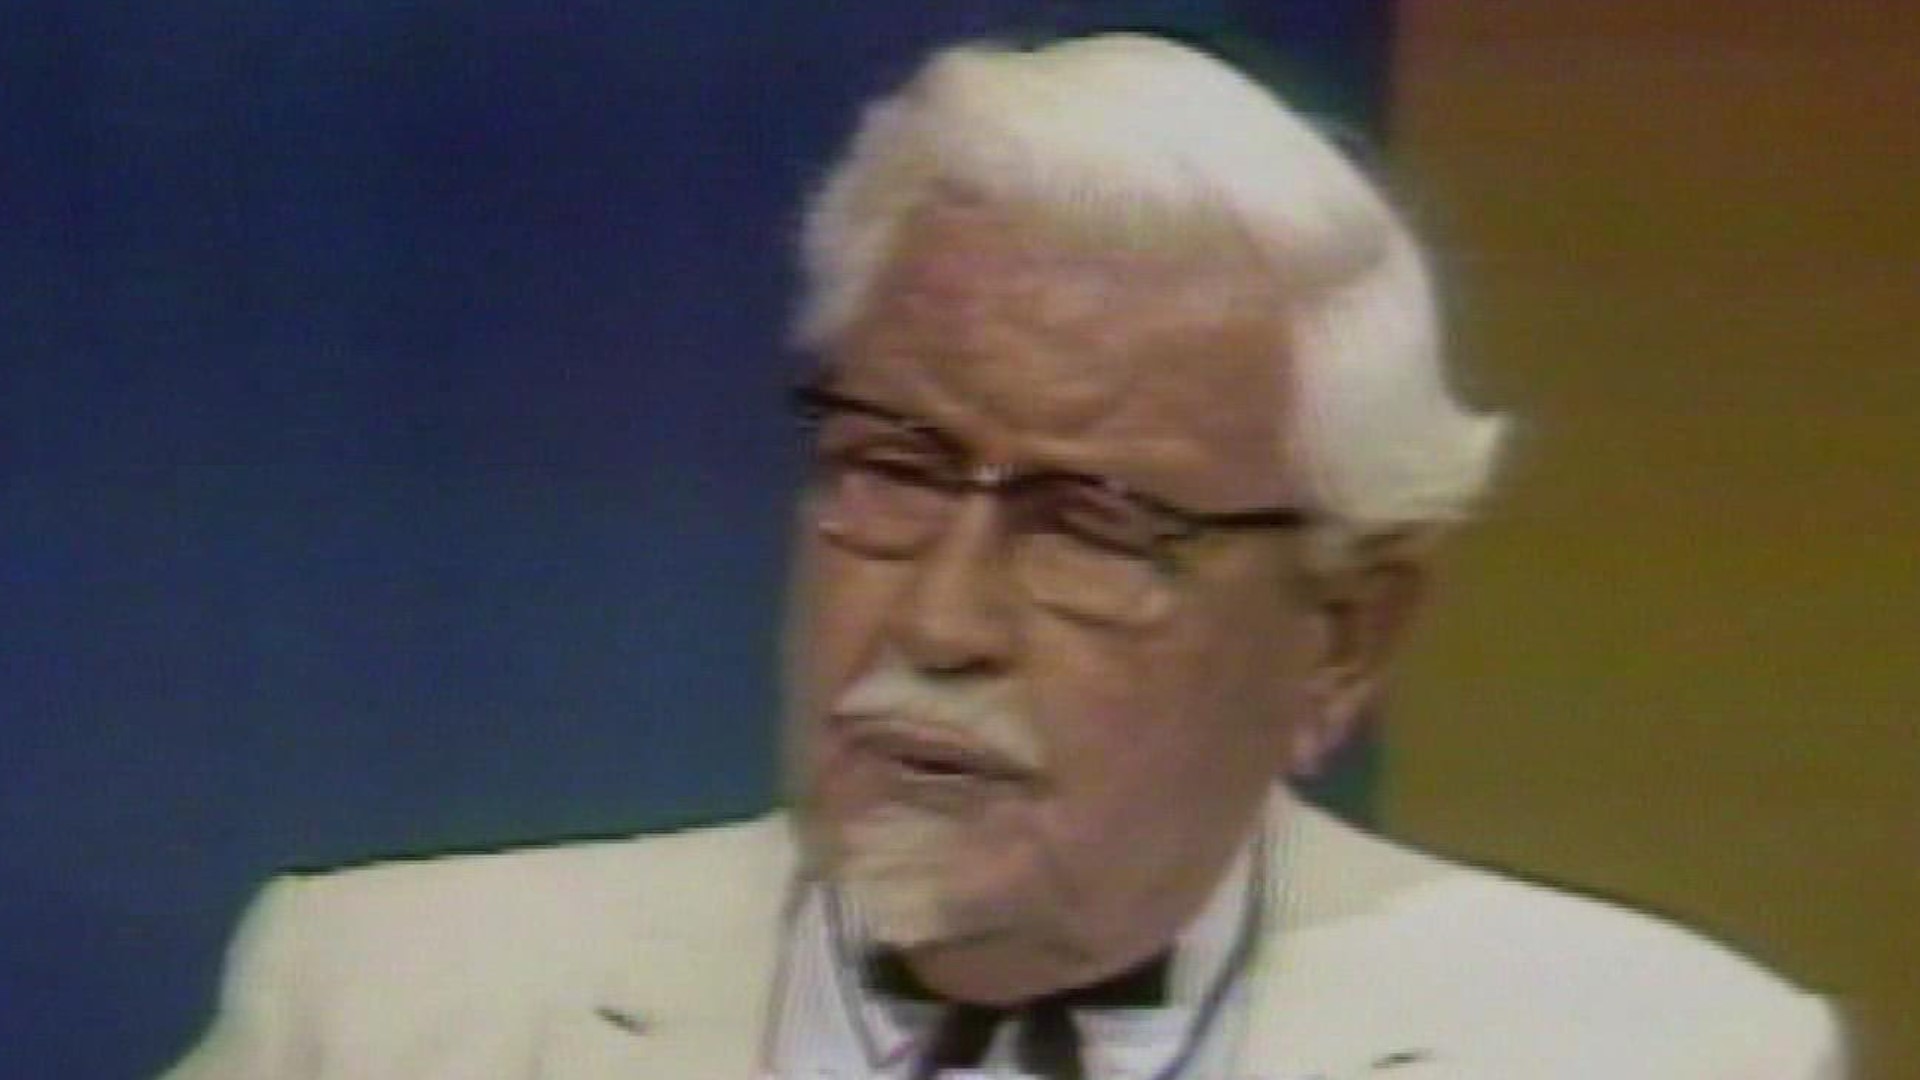 "Colonel Sanders didn't live to be a hundred as he hoped, but his ninety years were filled with enough accomplishment for a couple of lifetimes."